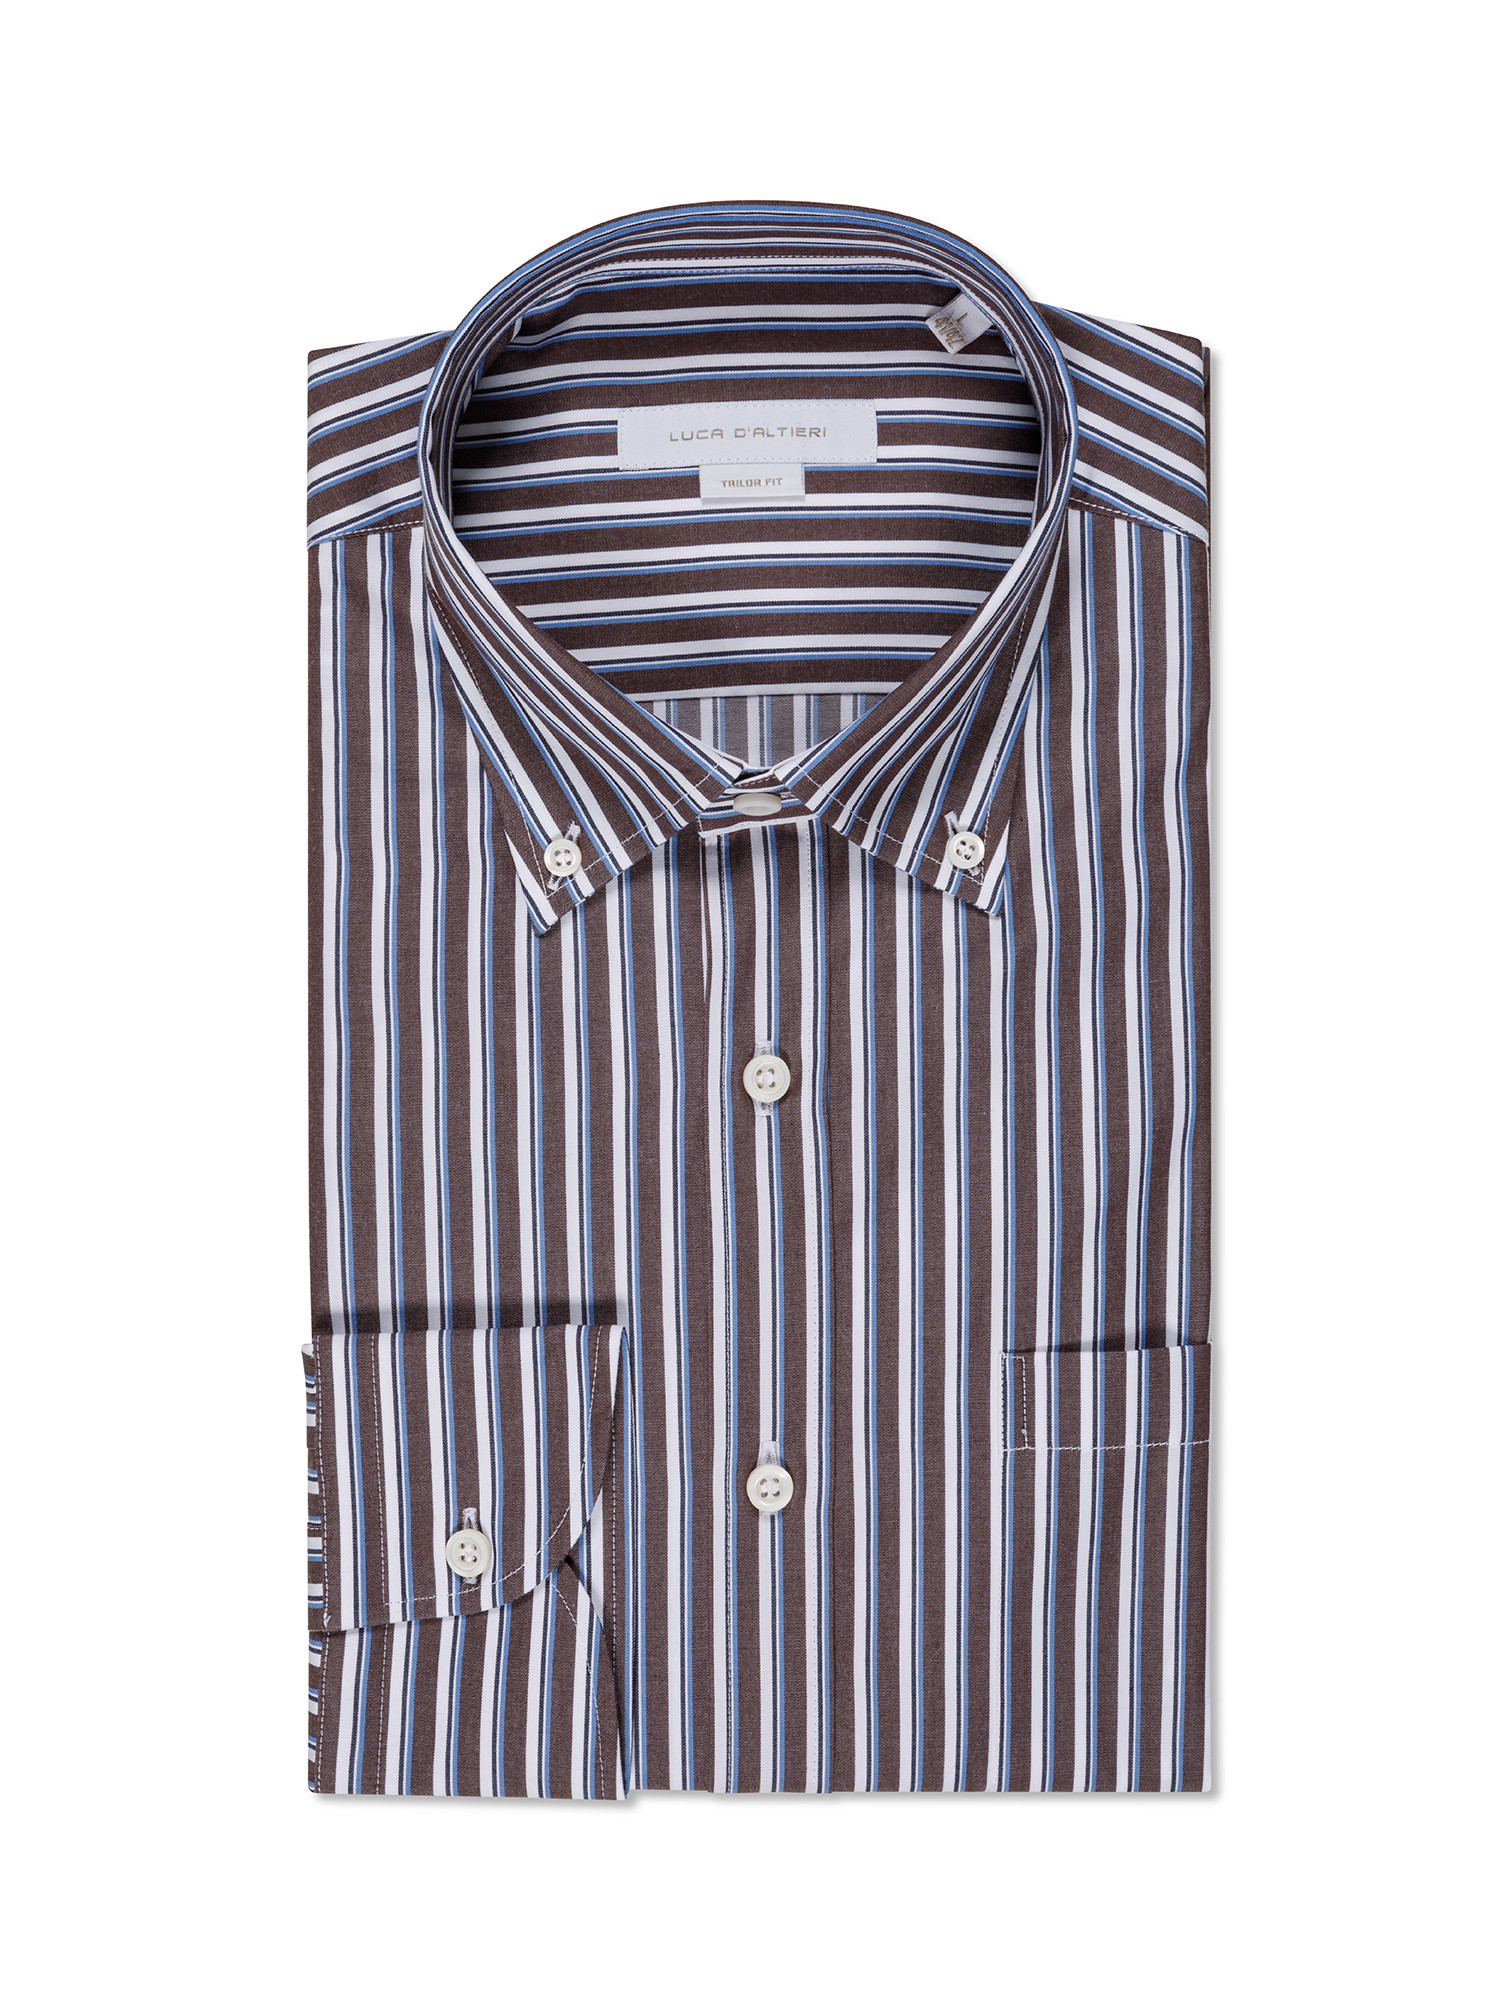 Luca D'Altieri - Tailor fit striped shirt in pure cotton, Brown, large image number 0